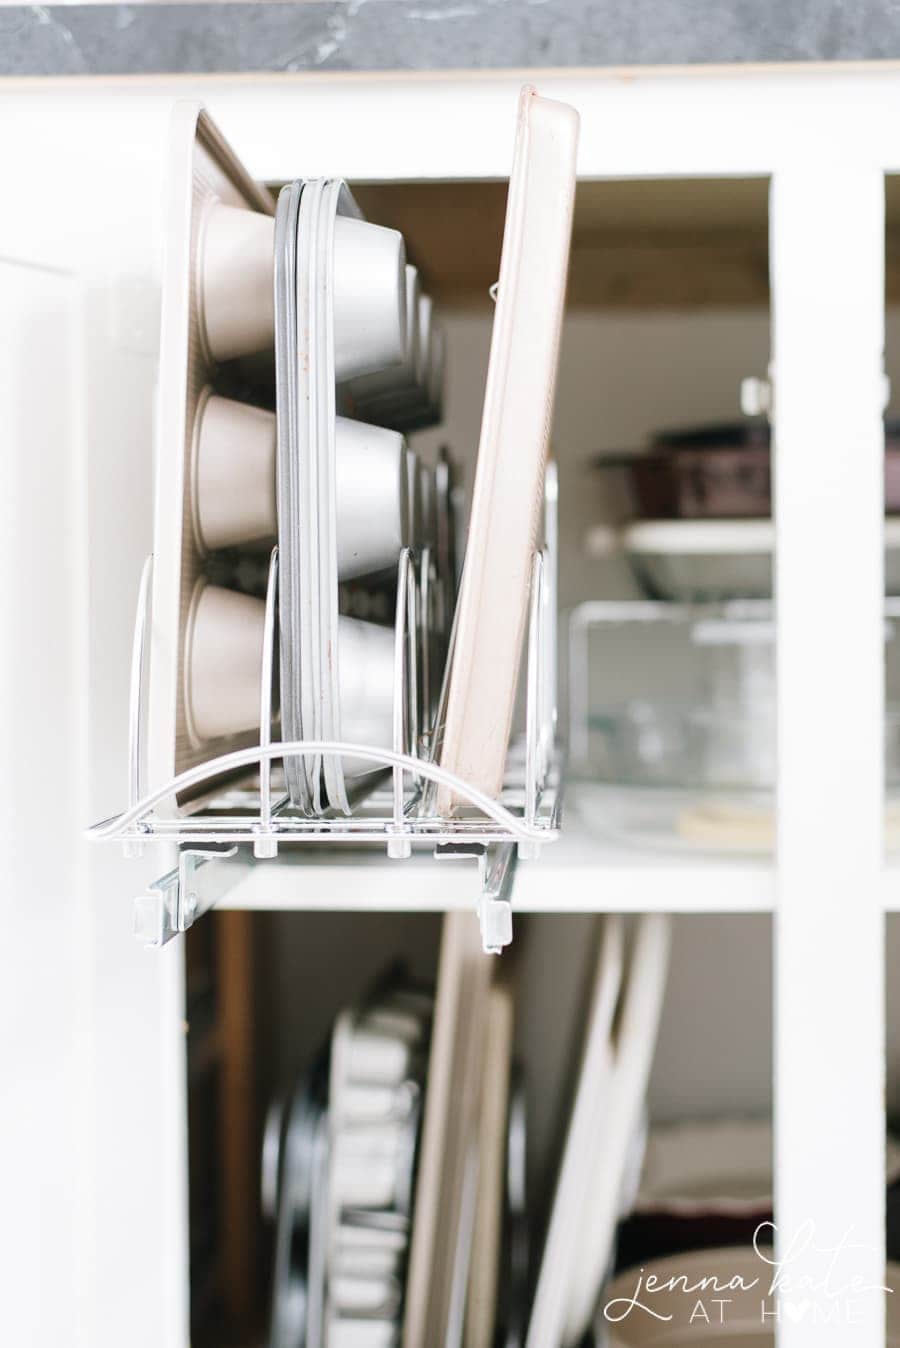 A stand alone baking sheet organizer with various baking sheets and muffin tins displayed.